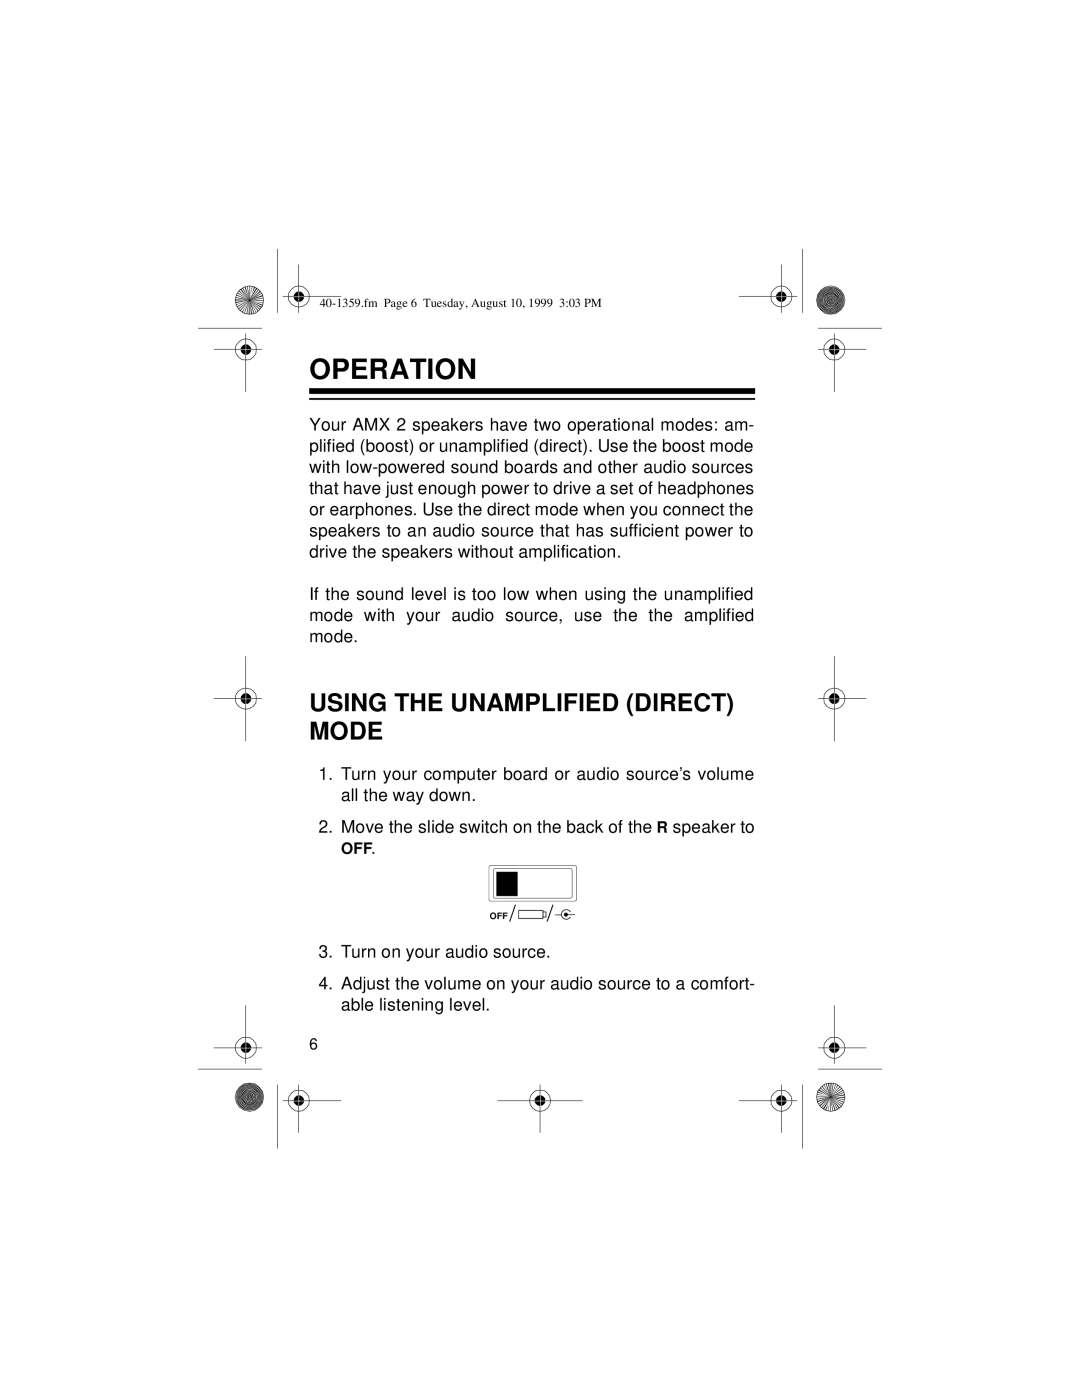 Optimus 40-1359 owner manual Operation, Using The Unamplified Direct Mode 